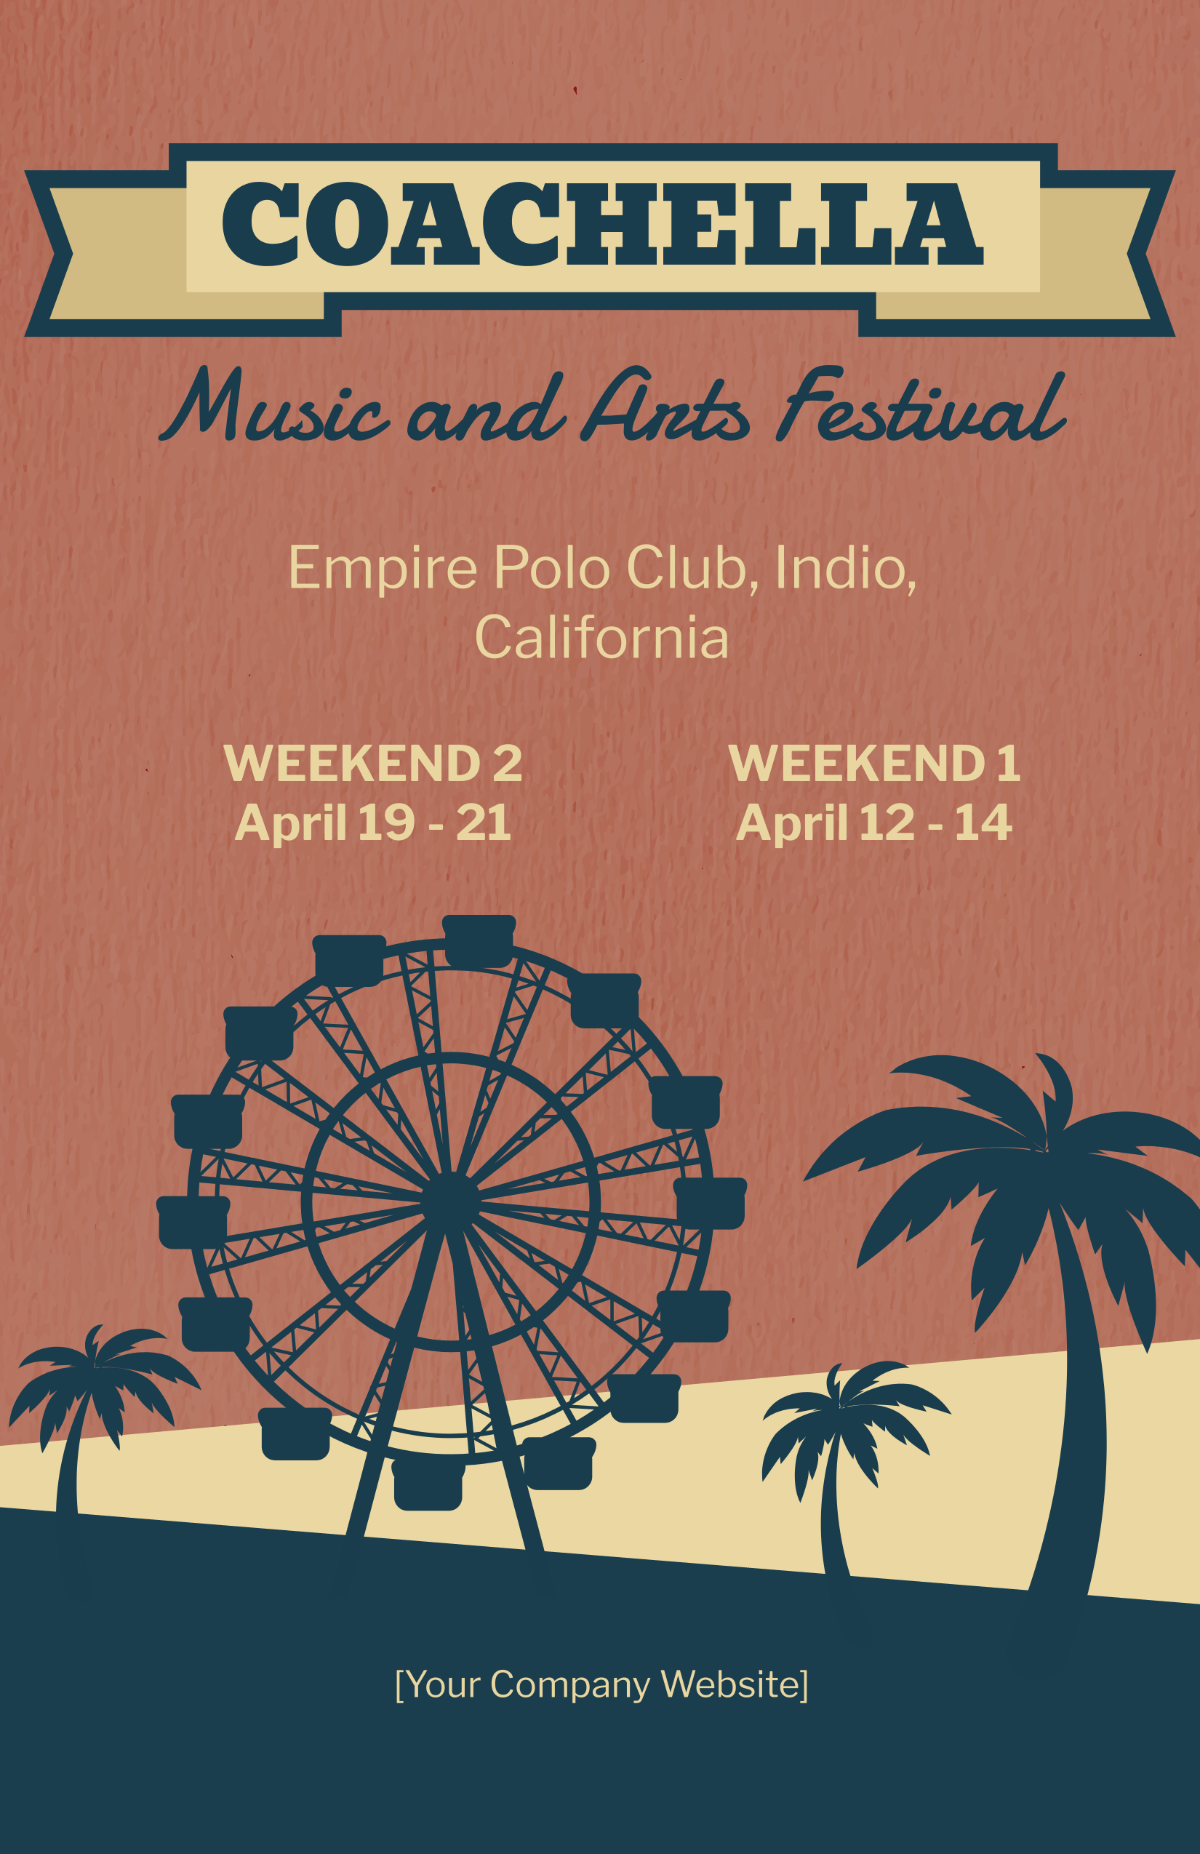 Old Coachella Poster Template